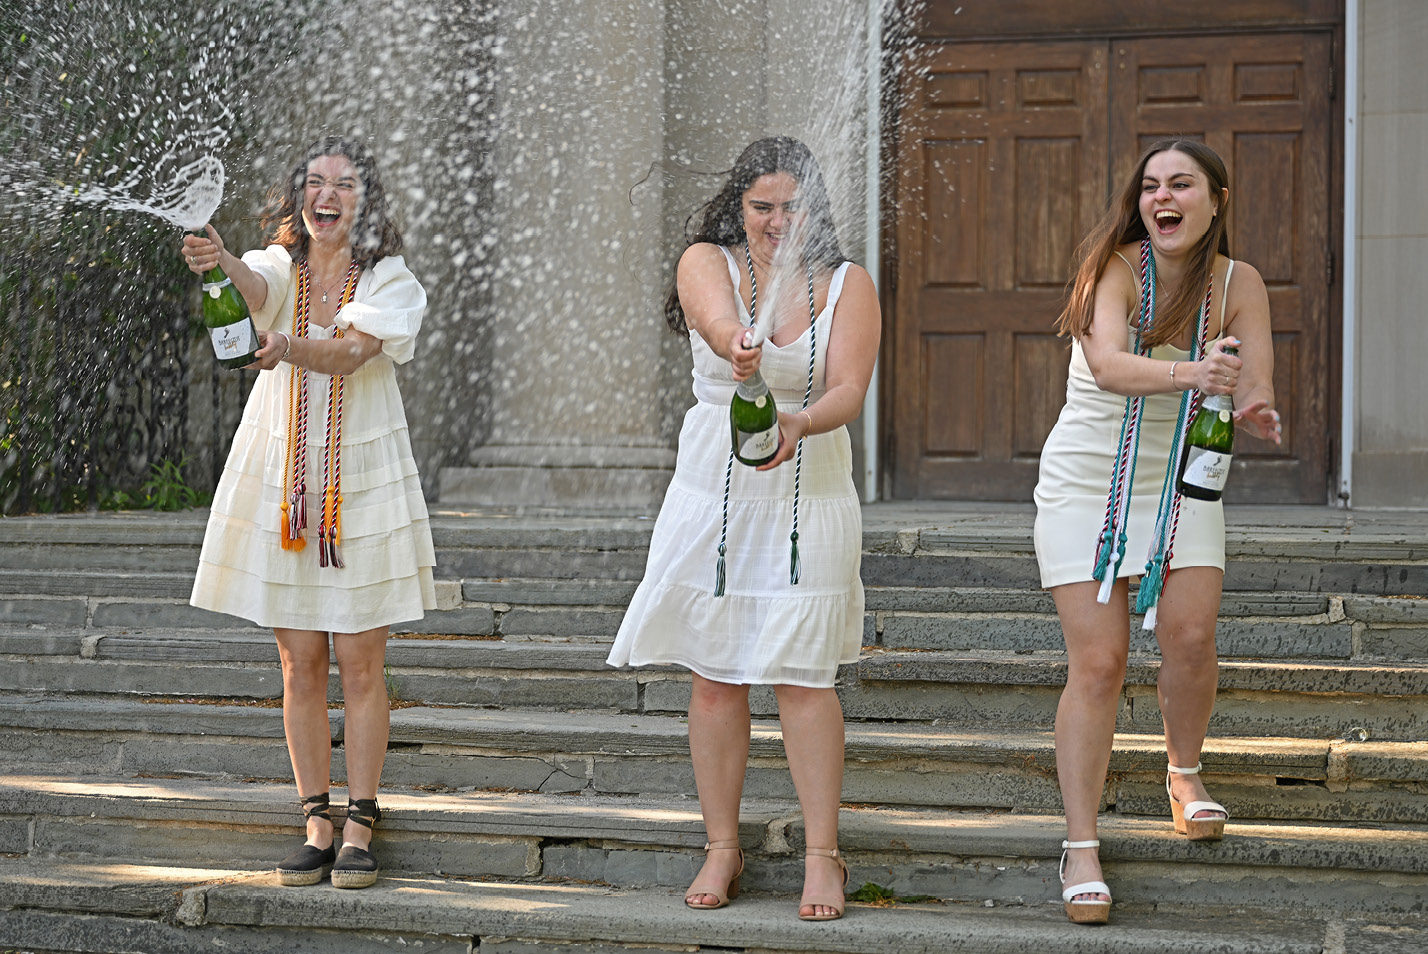 Students spray champagne to celebrate Commencement 2023